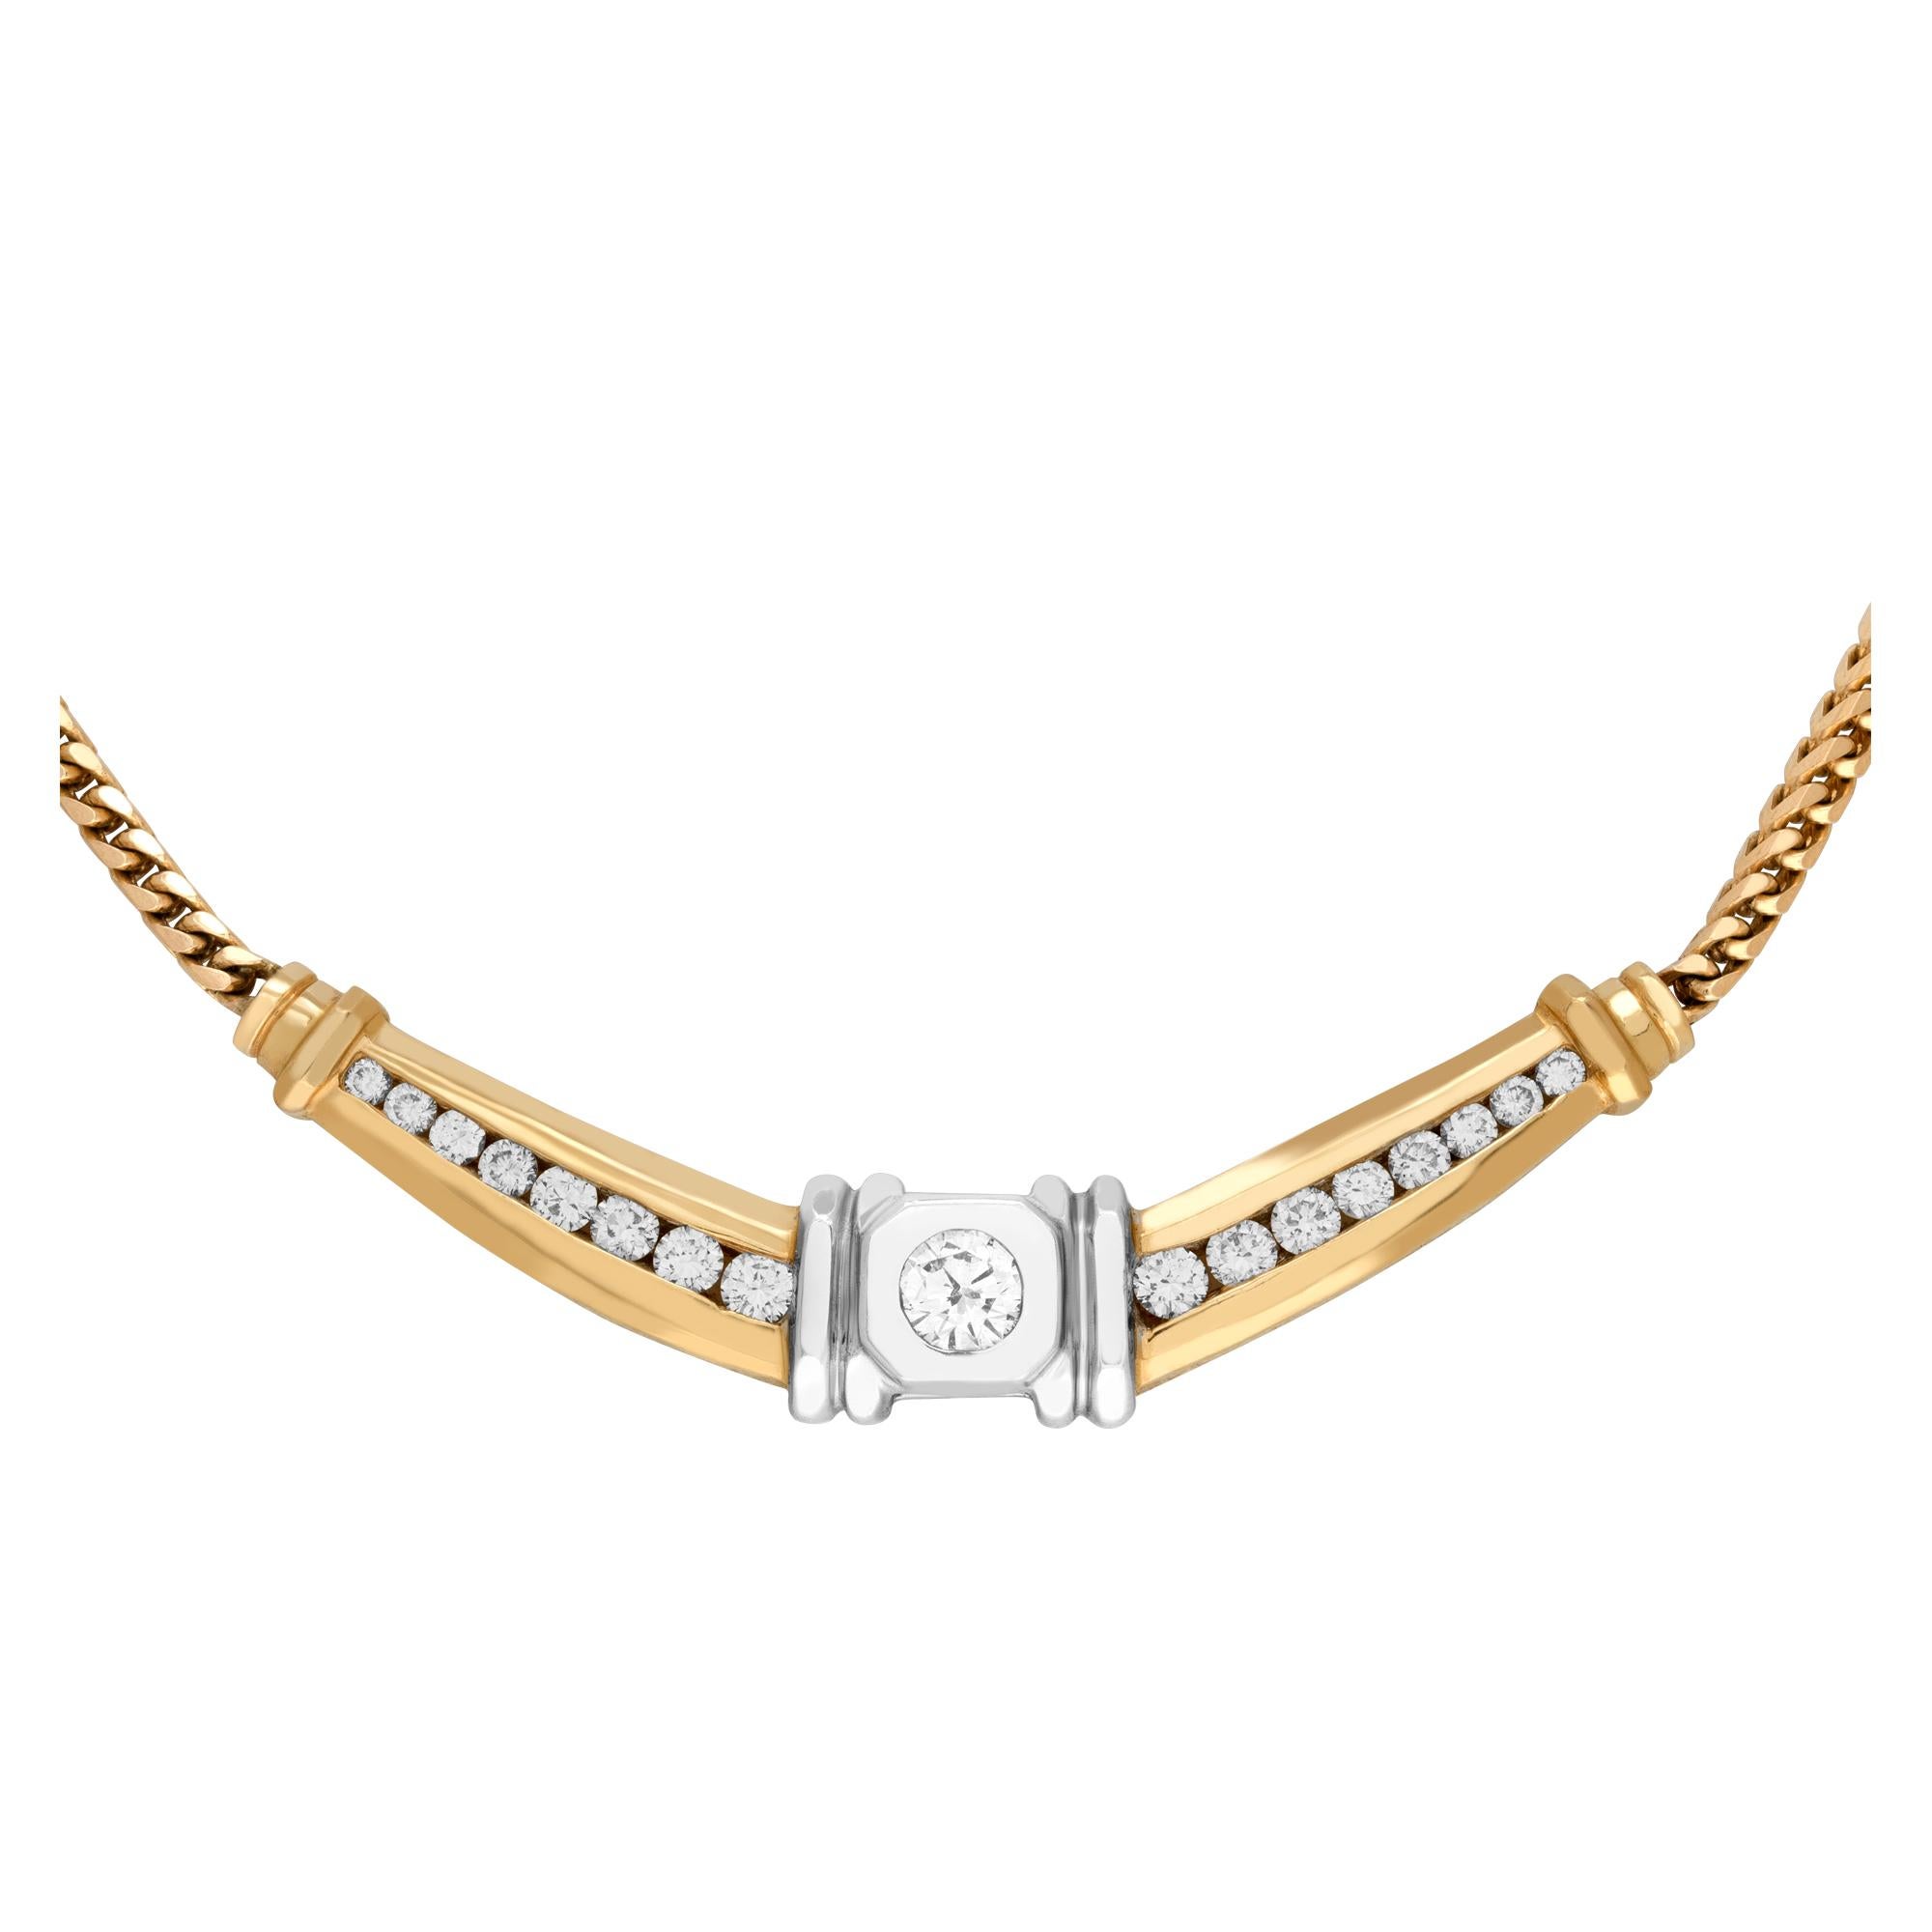 Classic chain/necklace with diamond motif center,set in 14k yellow and white gold. Total diamond approximative weight: 1.50 carat. All round brilliant cut diamonds channel and bezel set center estimate: G/H color, VS/SI clarity. Heavy 